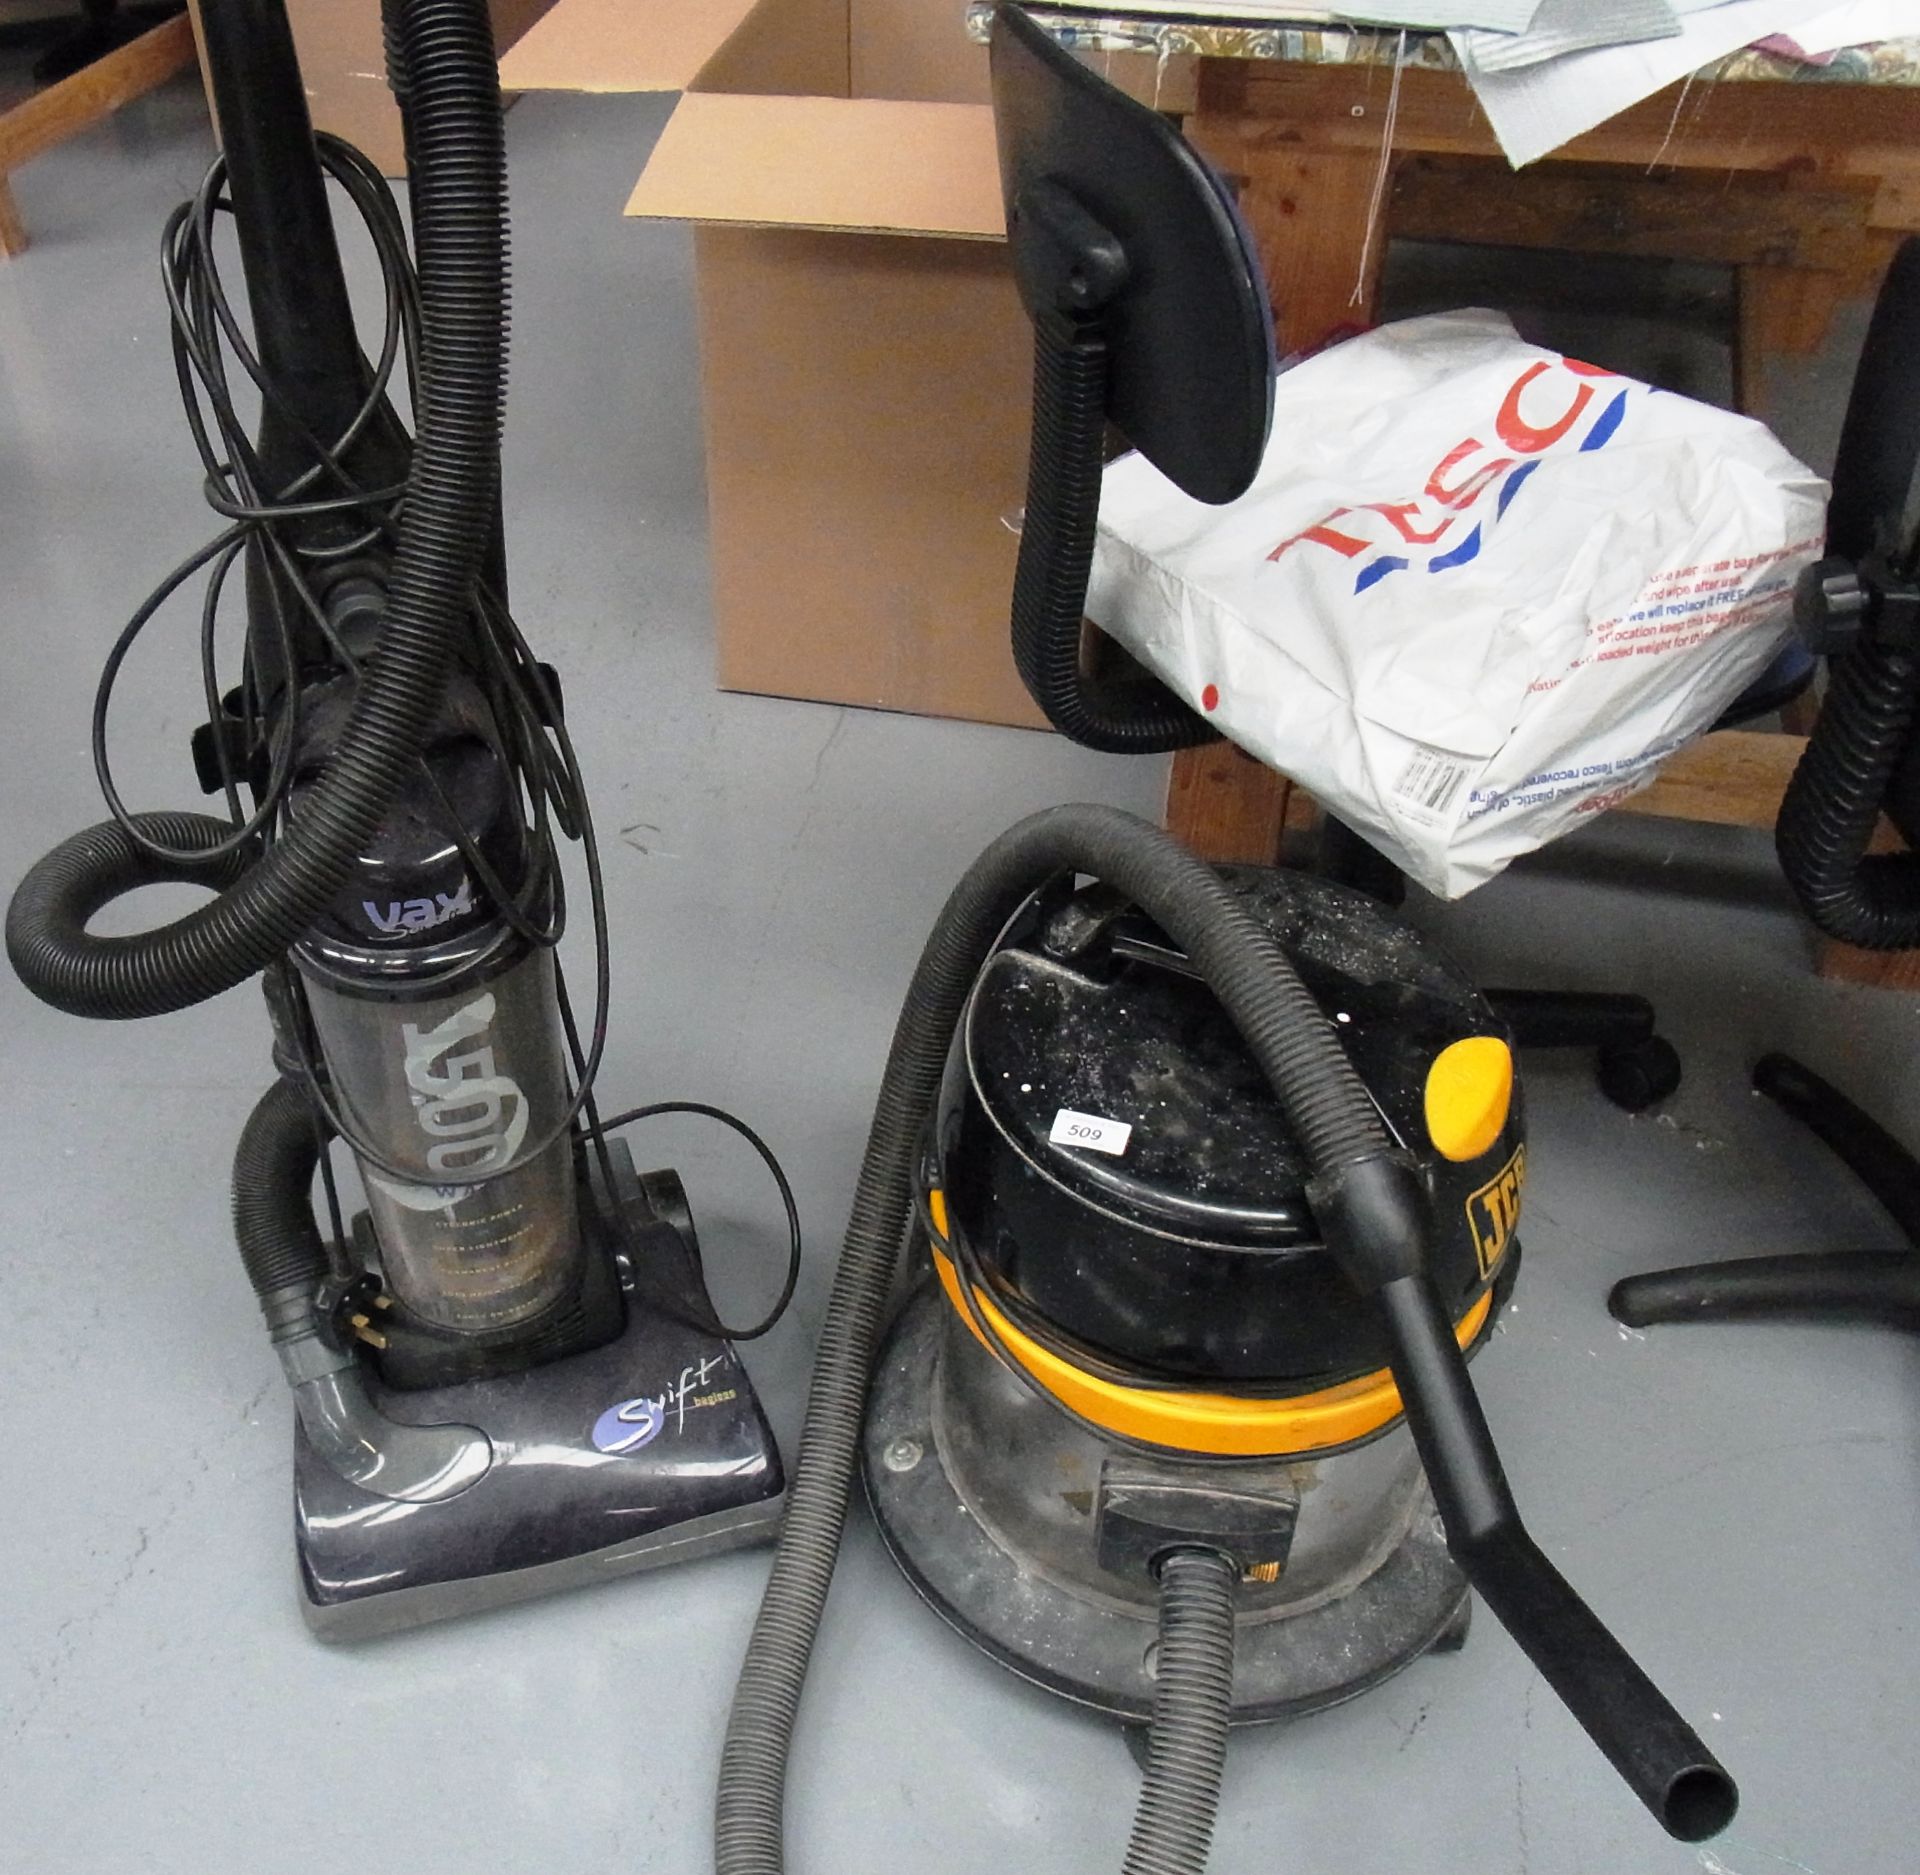 2 x vacuum cleaners by JCB and Swift